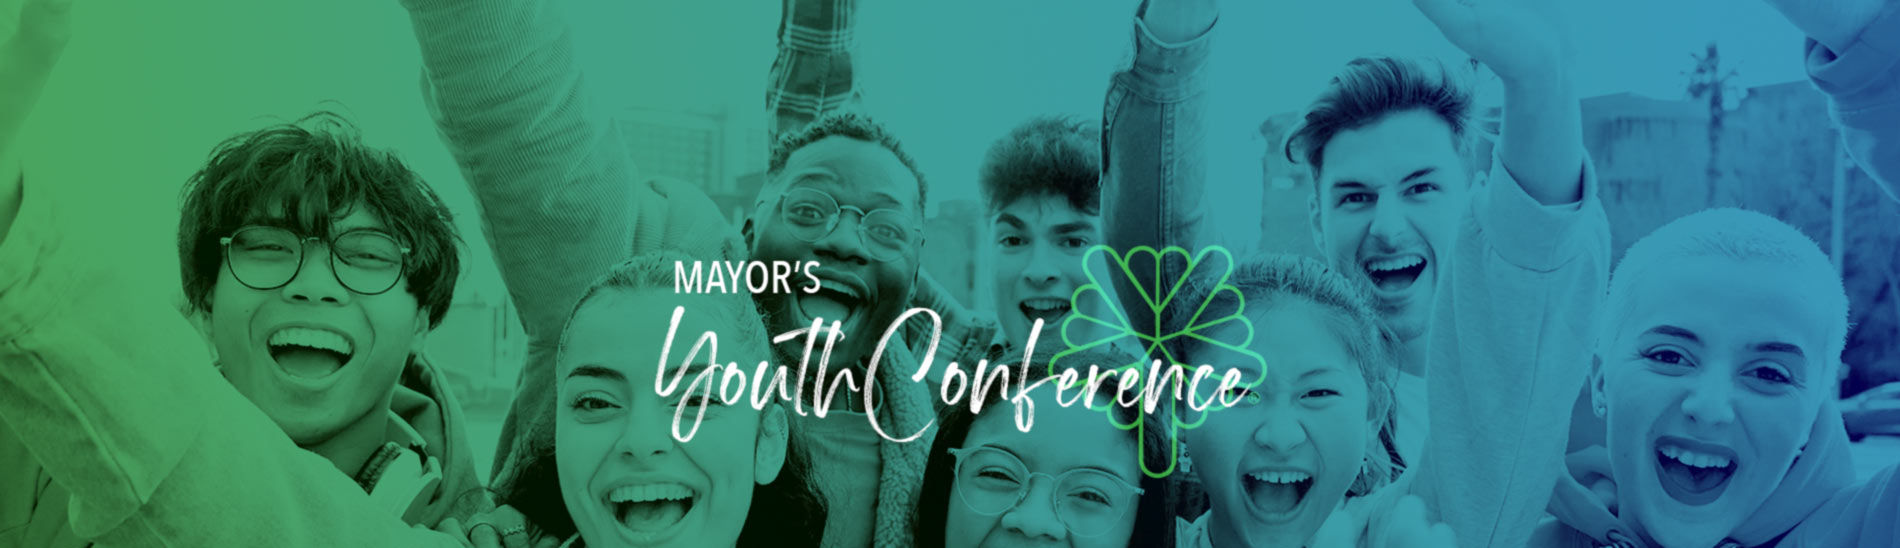 Group of youth smiling for a selfie with the words Mayor's Youth Conference superimposed over the front. The image is shown with a colorful green to blue overlay and the City's five seasons tree logo is displayed.